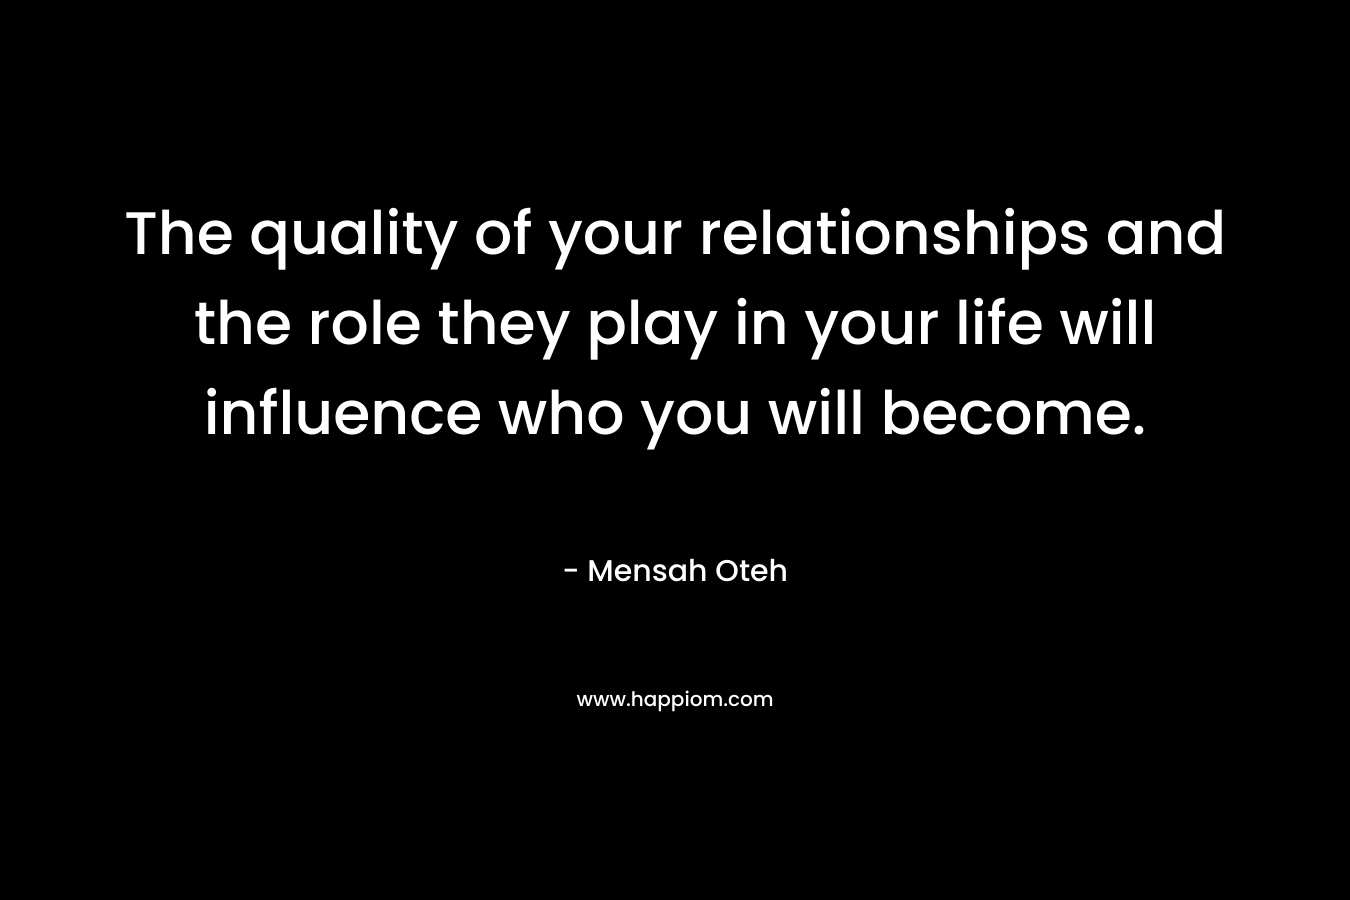 The quality of your relationships and the role they play in your life will influence who you will become. – Mensah Oteh